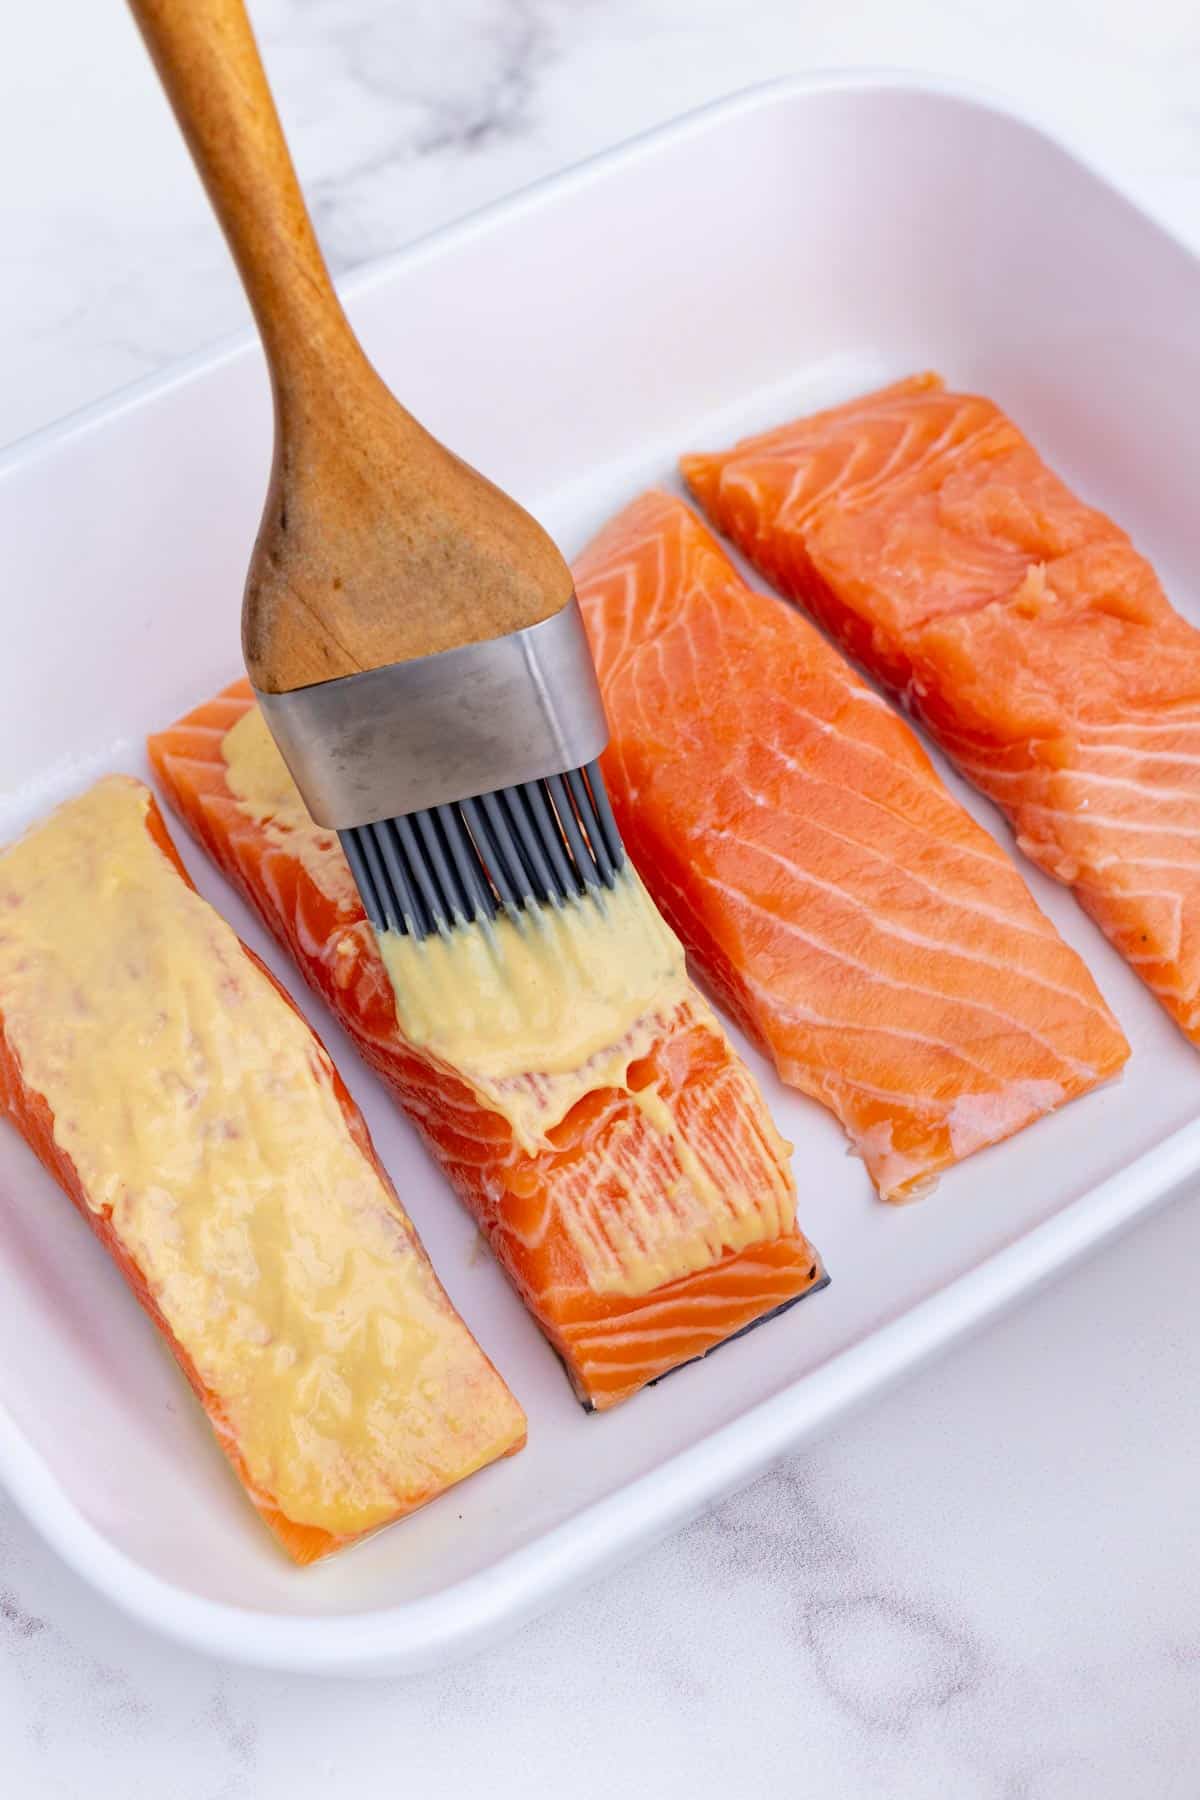 Mustard is brushed over salmon filets.